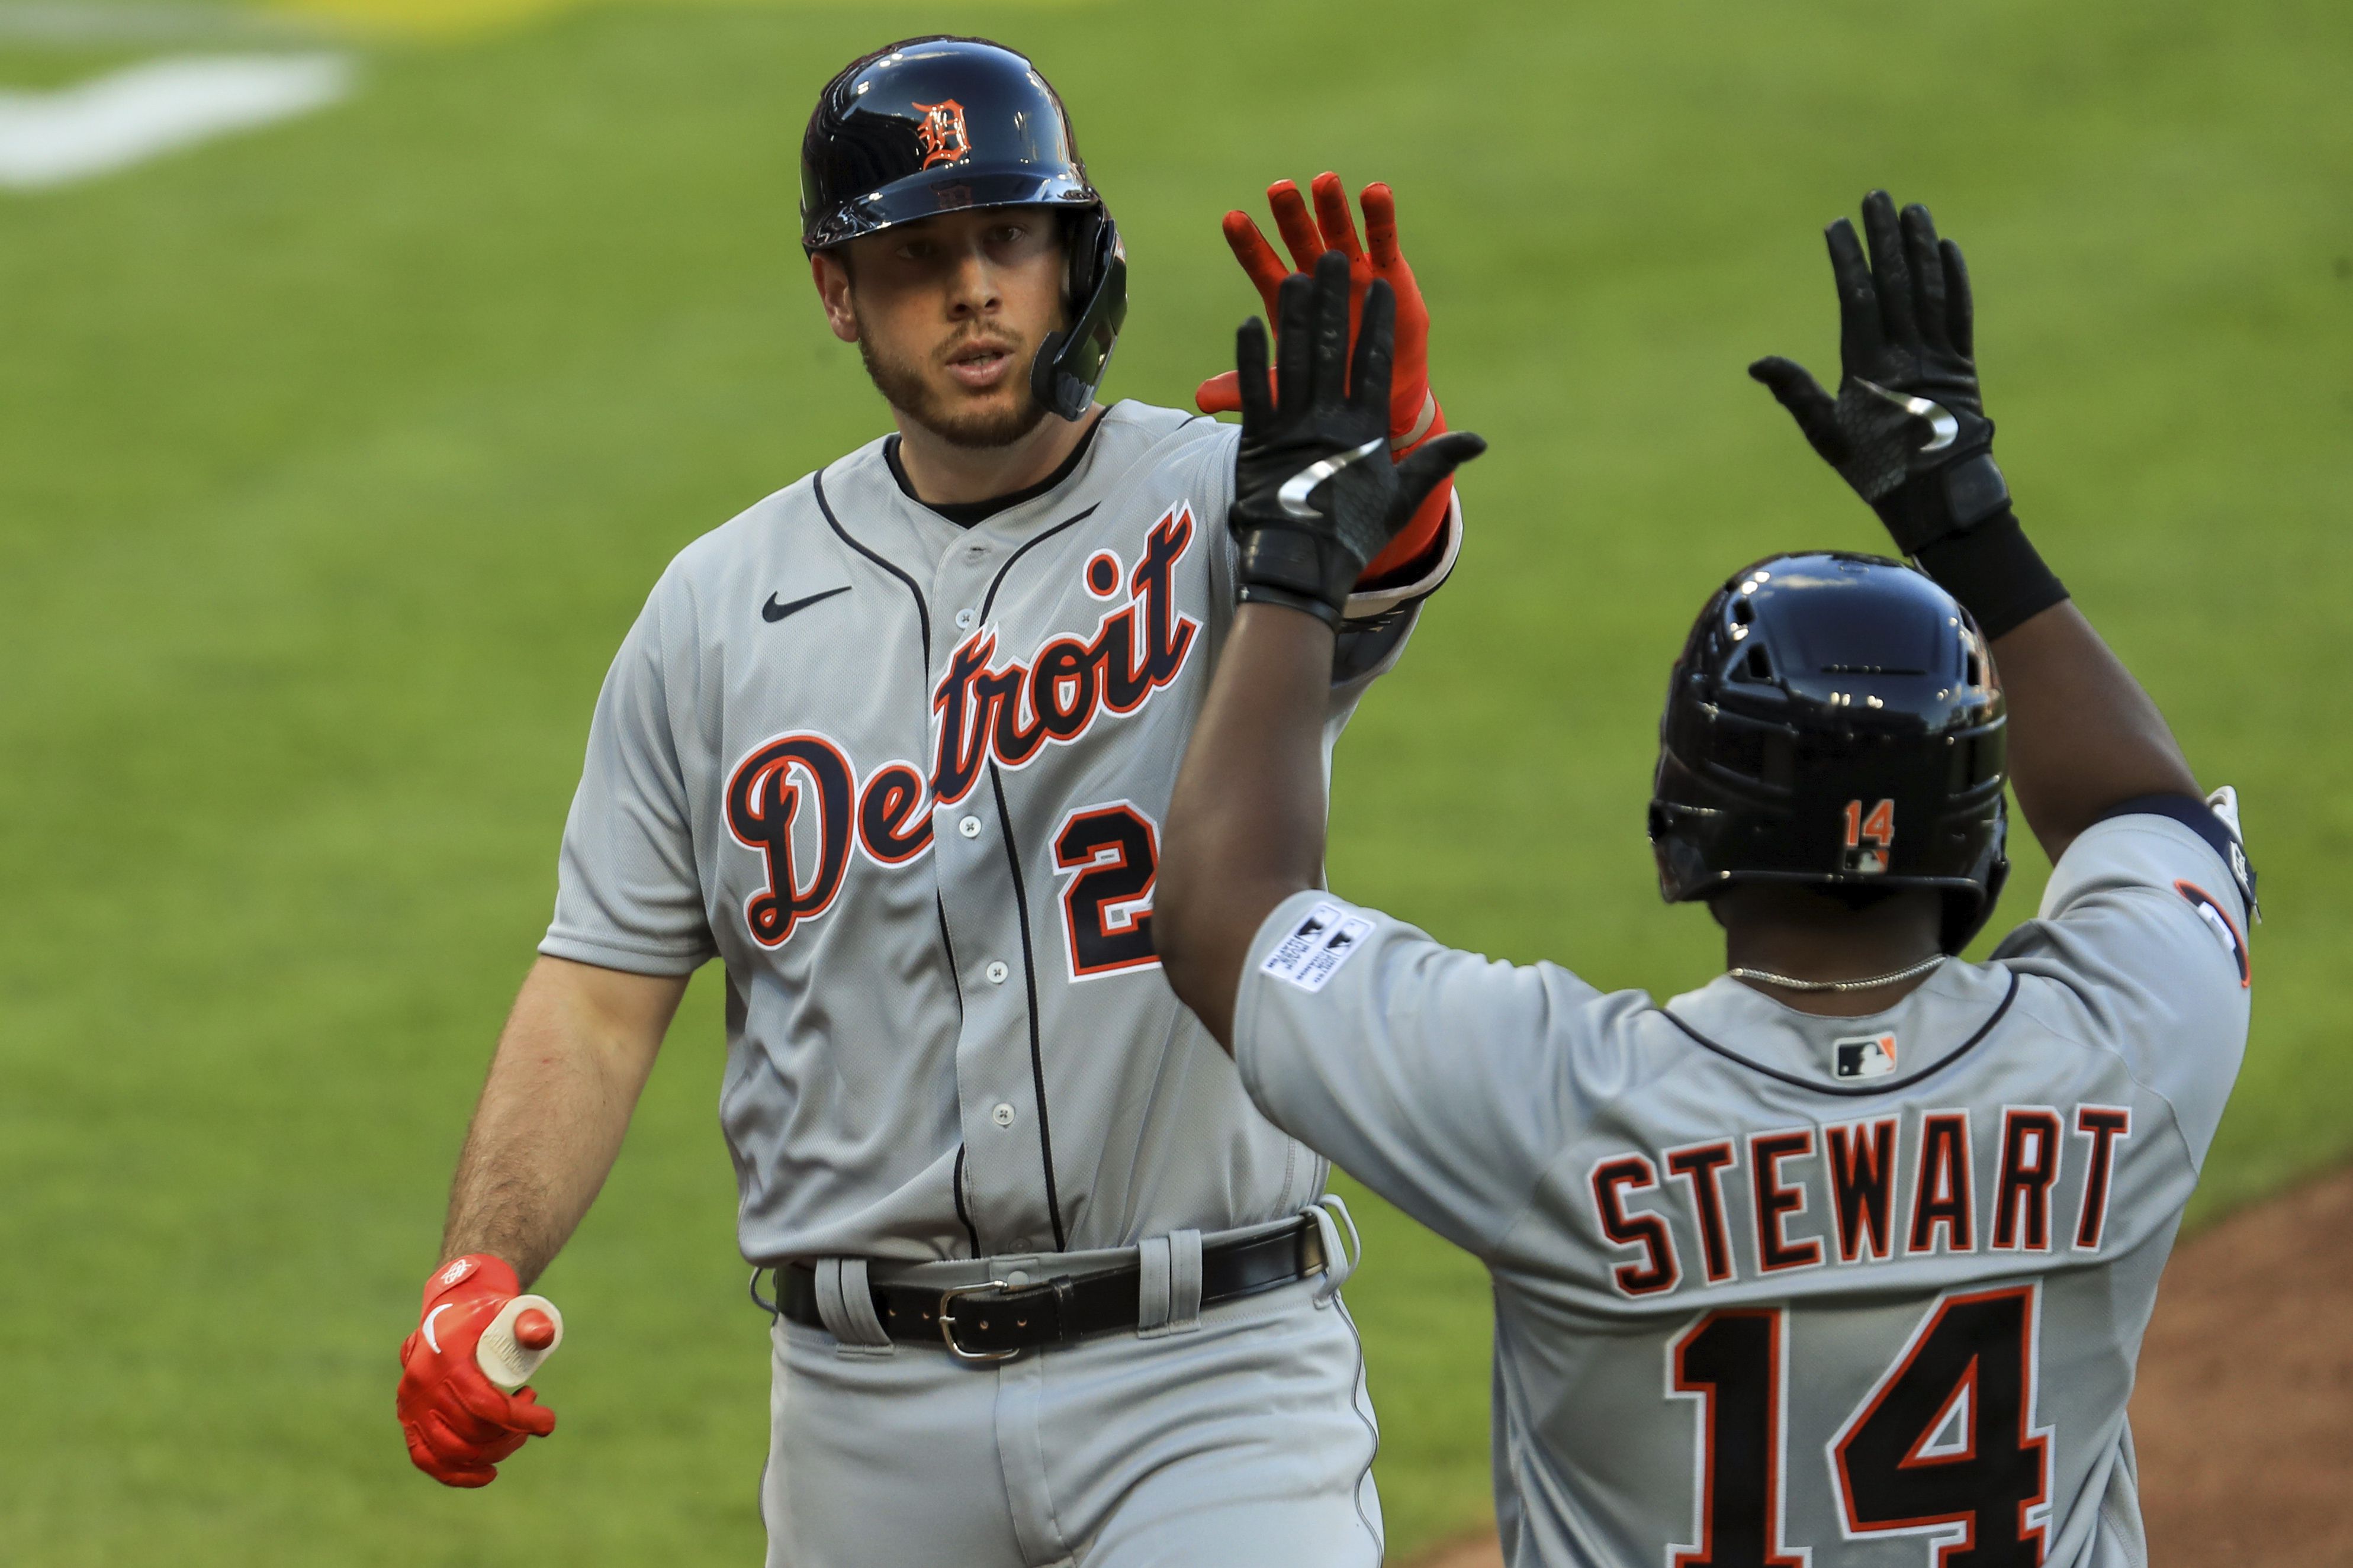 Tigers' C.J. Cron 447-foot home run the bright spot in rough Opening Day 